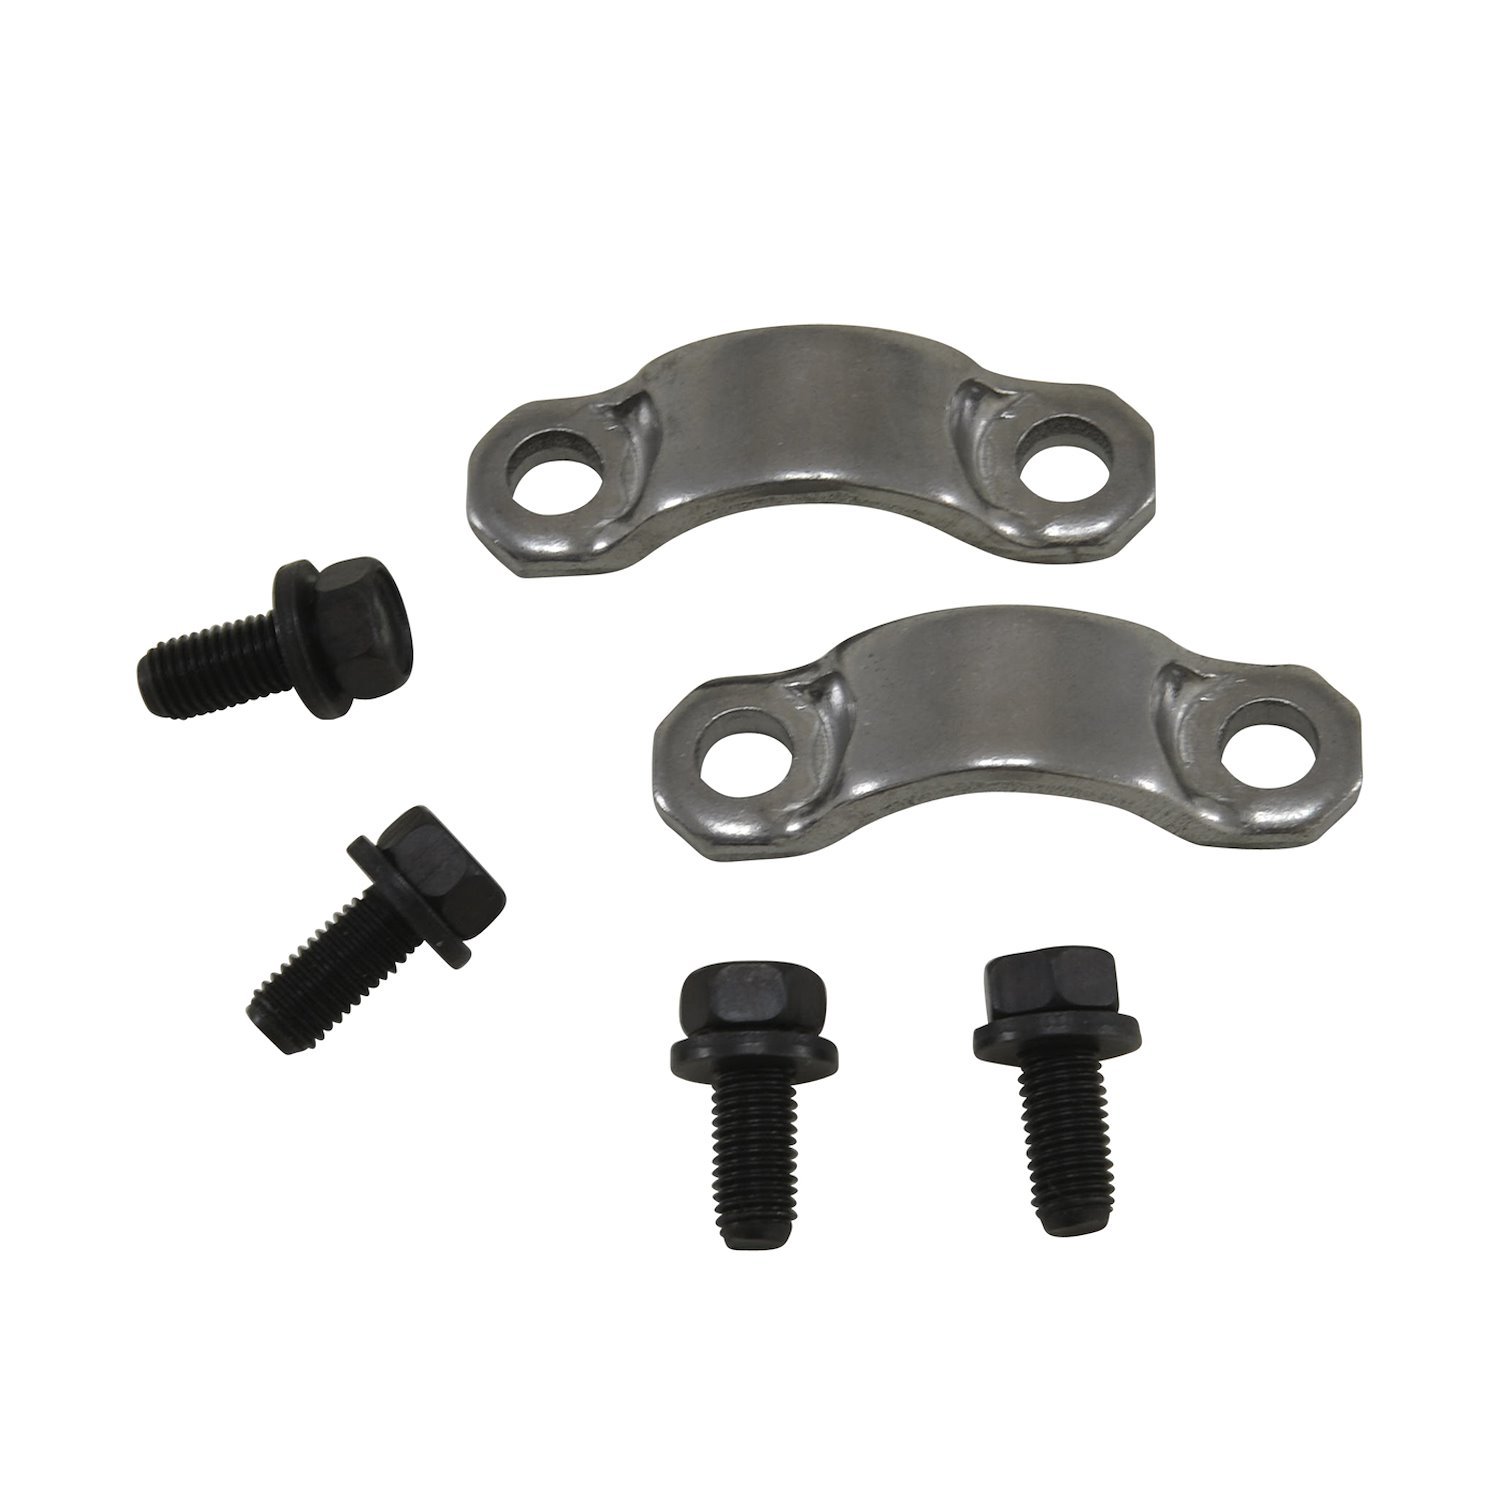 U-Joint Strap Kit Fits Chrysler 7.25", 8.25" 8.75" and 9.25" Rear